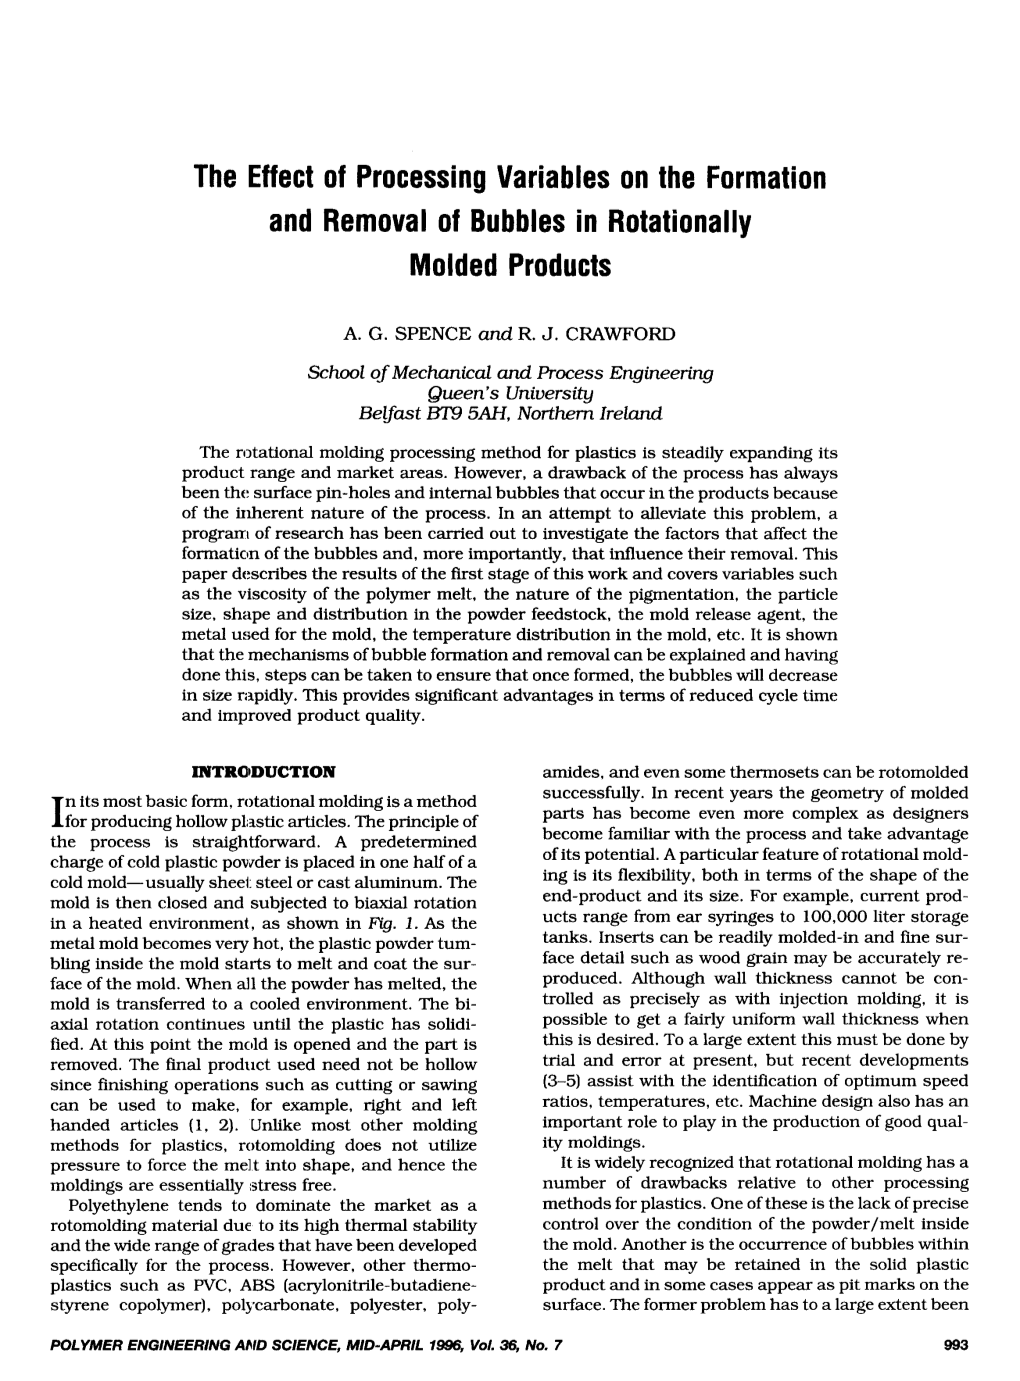 The Effect of Processing Variables on the Formation and Removal of Bubbles in Rotationally Molded Products